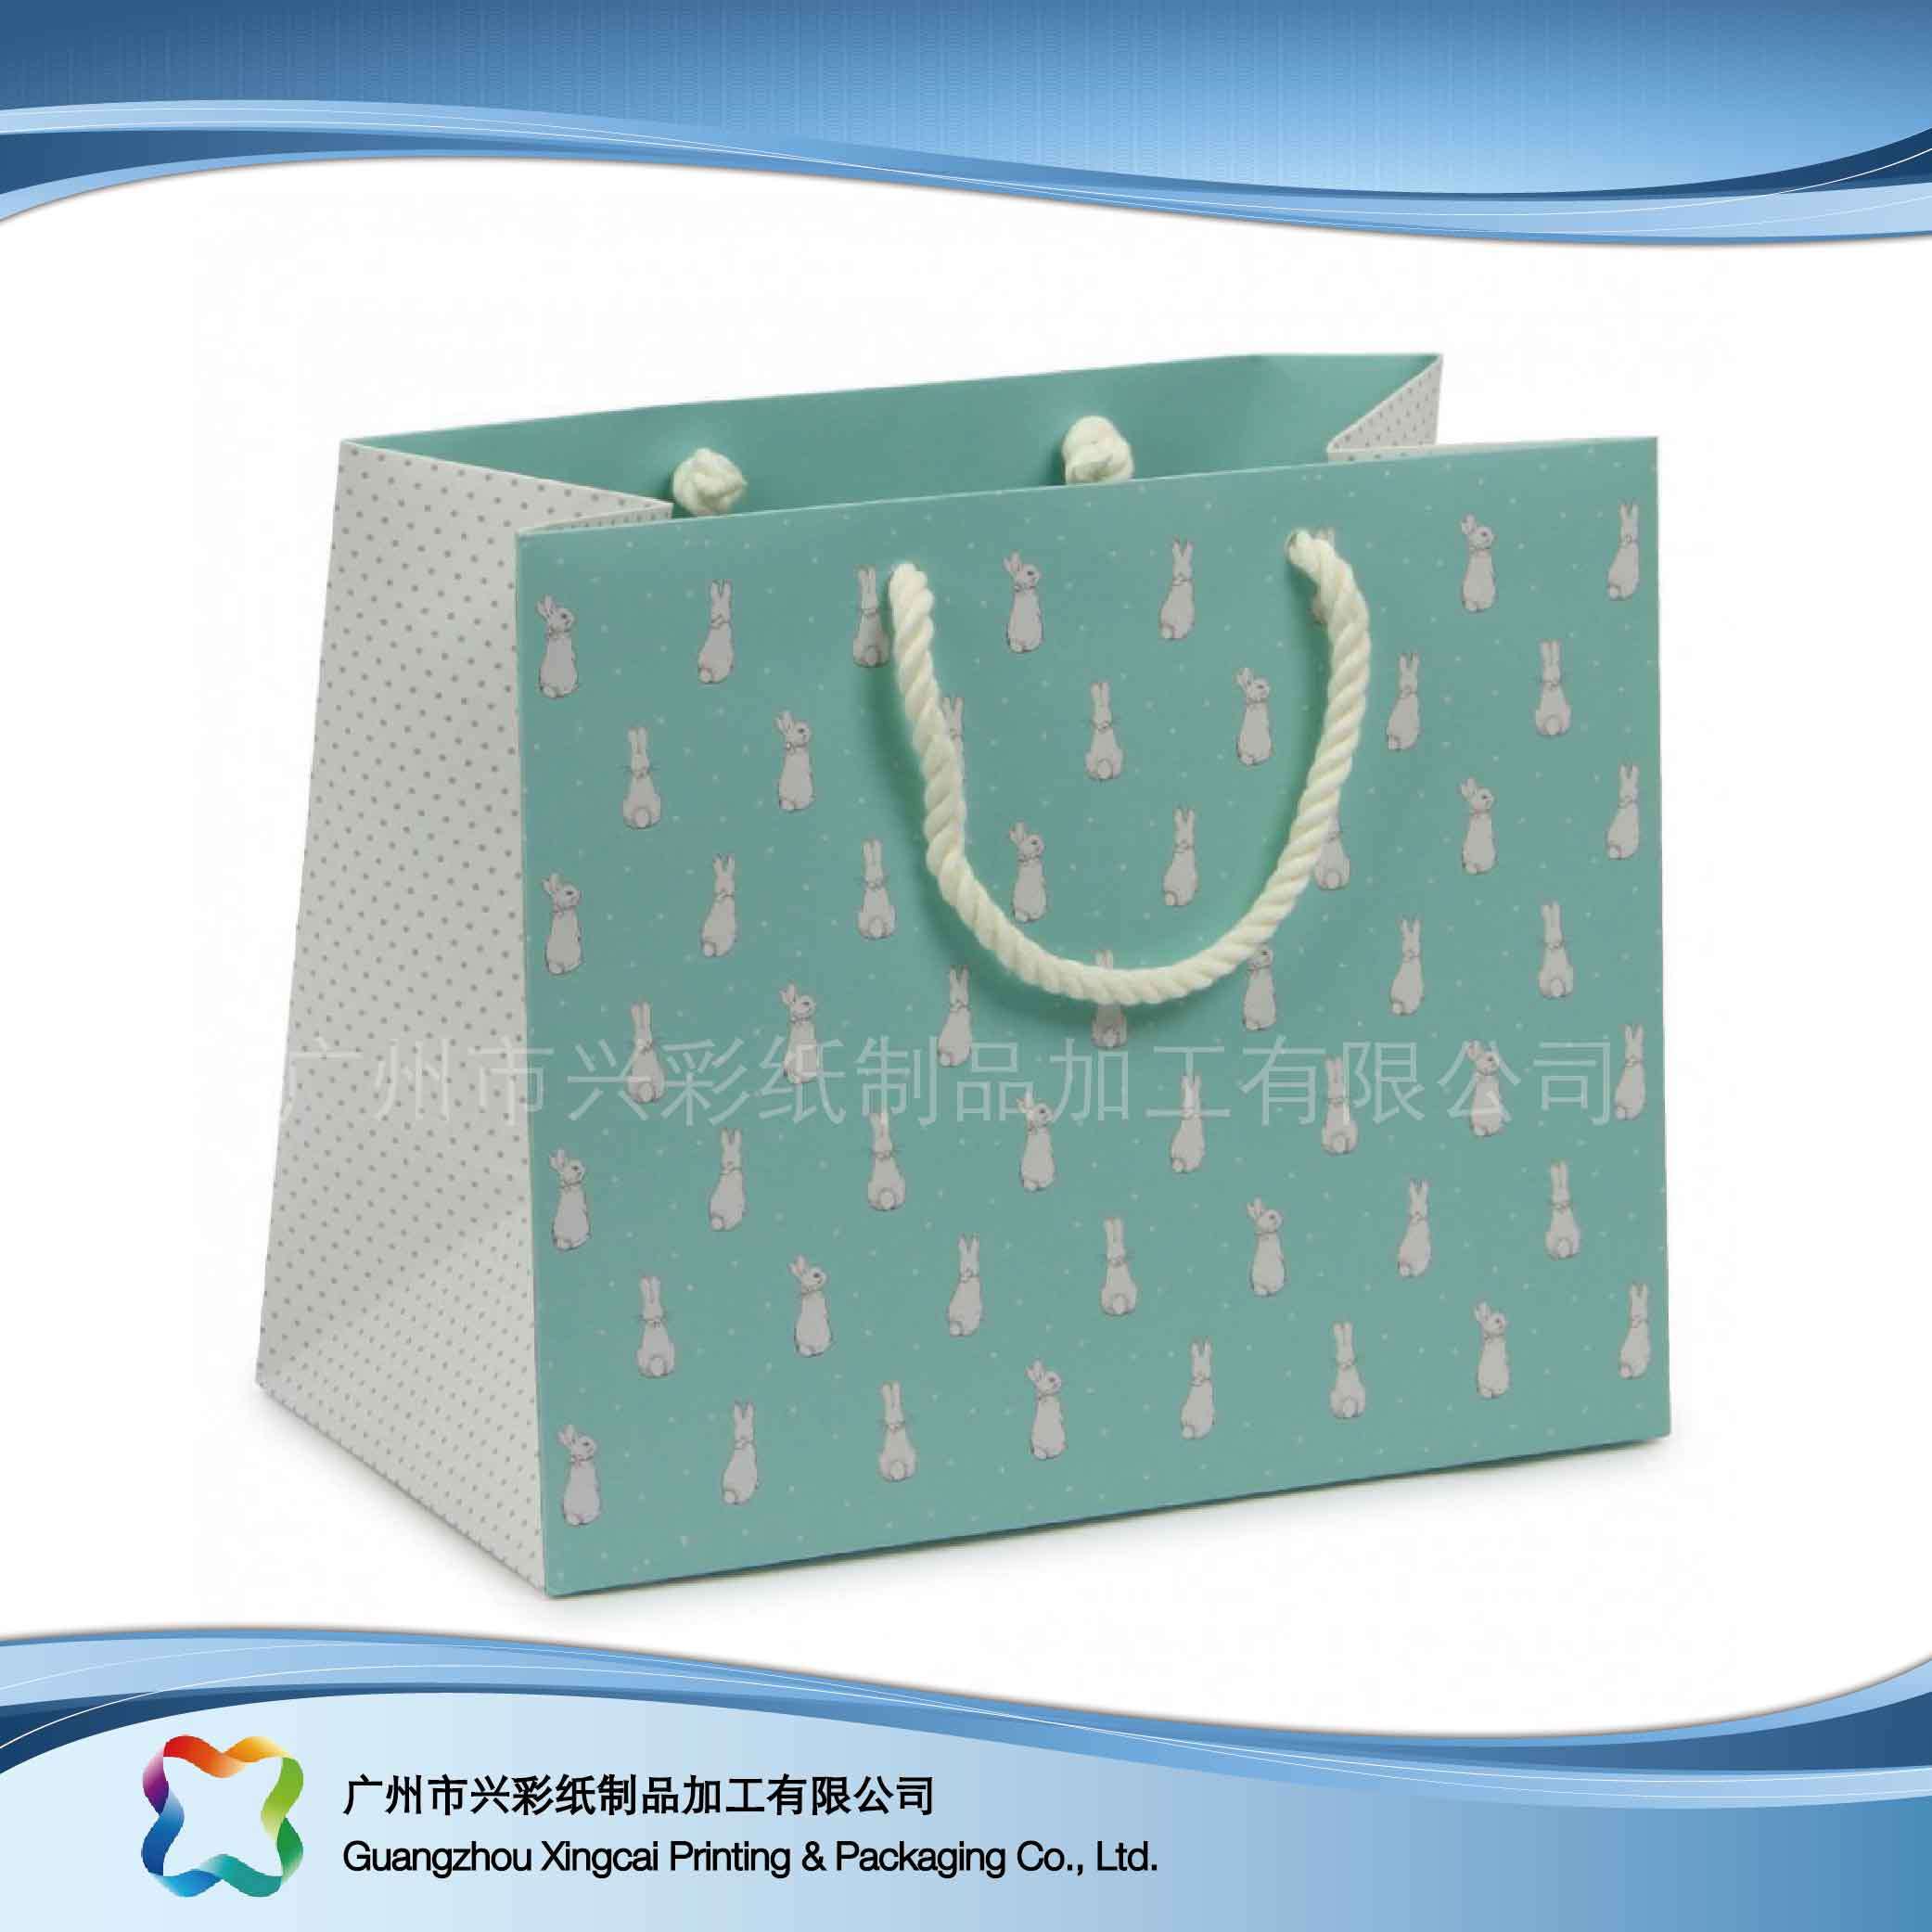 Printed Paper Packaging Carrier Bag for Shopping/ Gift/ Clothes (XC-bgg-039)